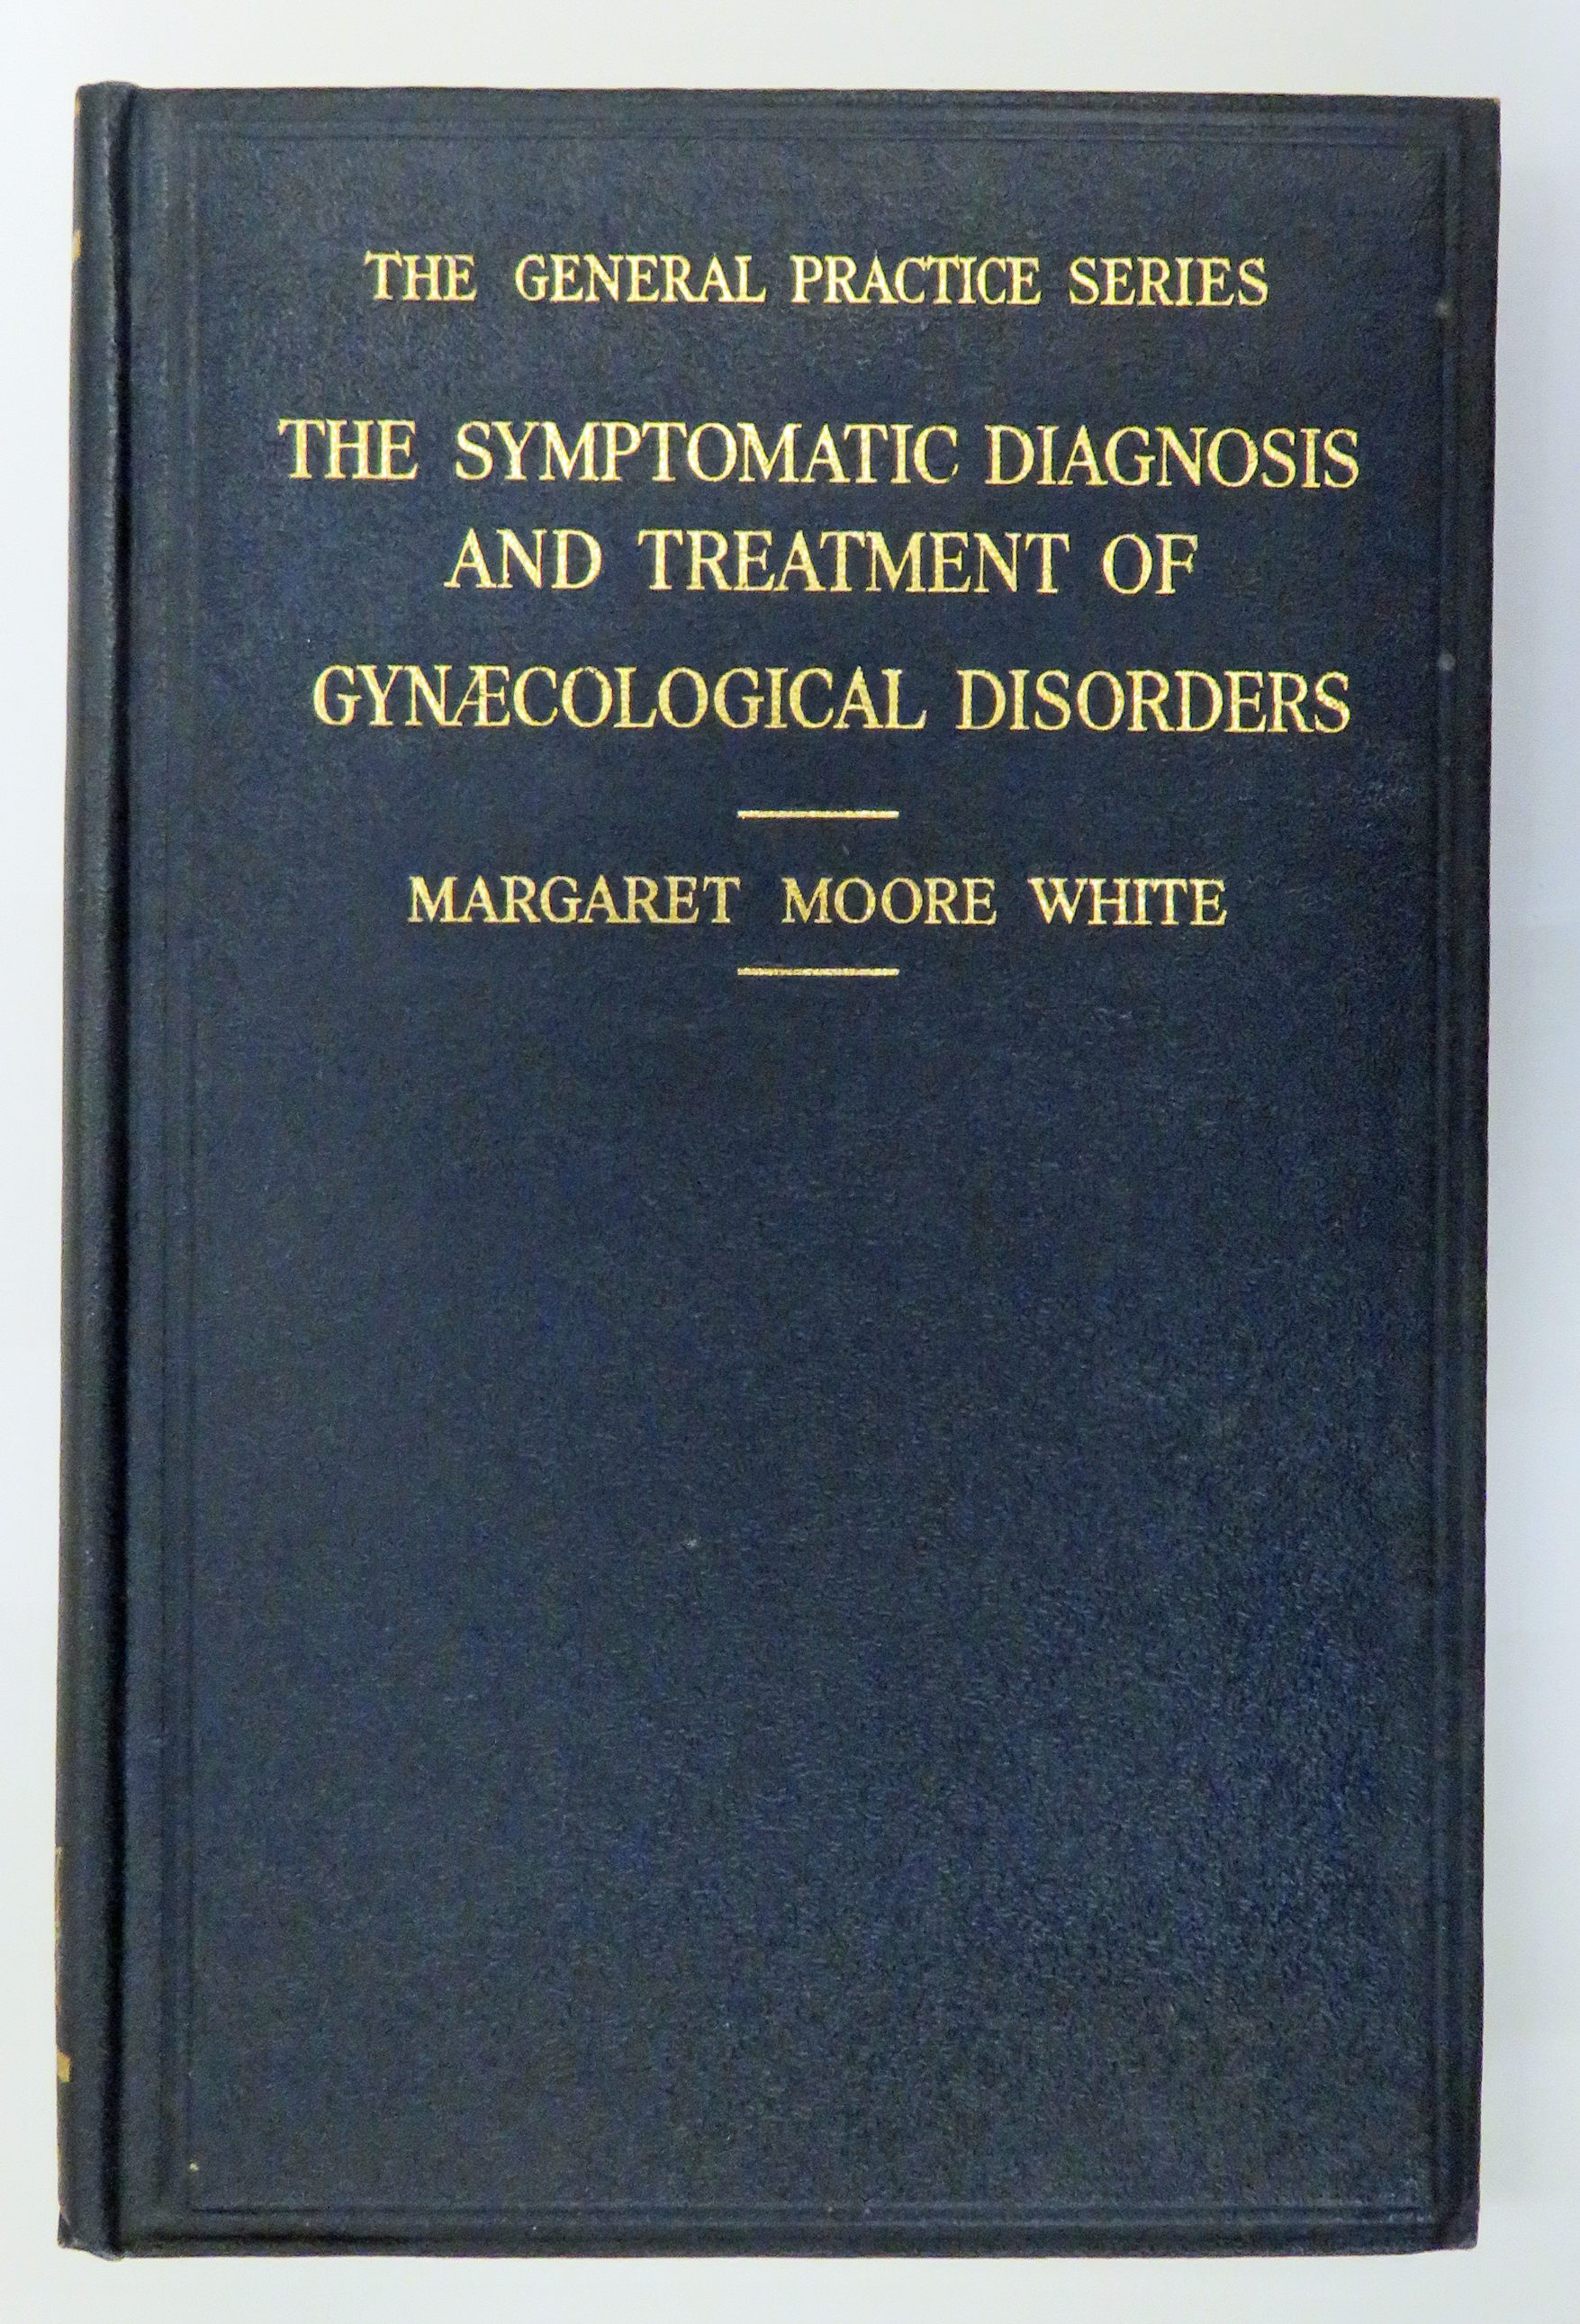 The Symptomatic Diagnosis and Treatment of Gynaecological Disorders